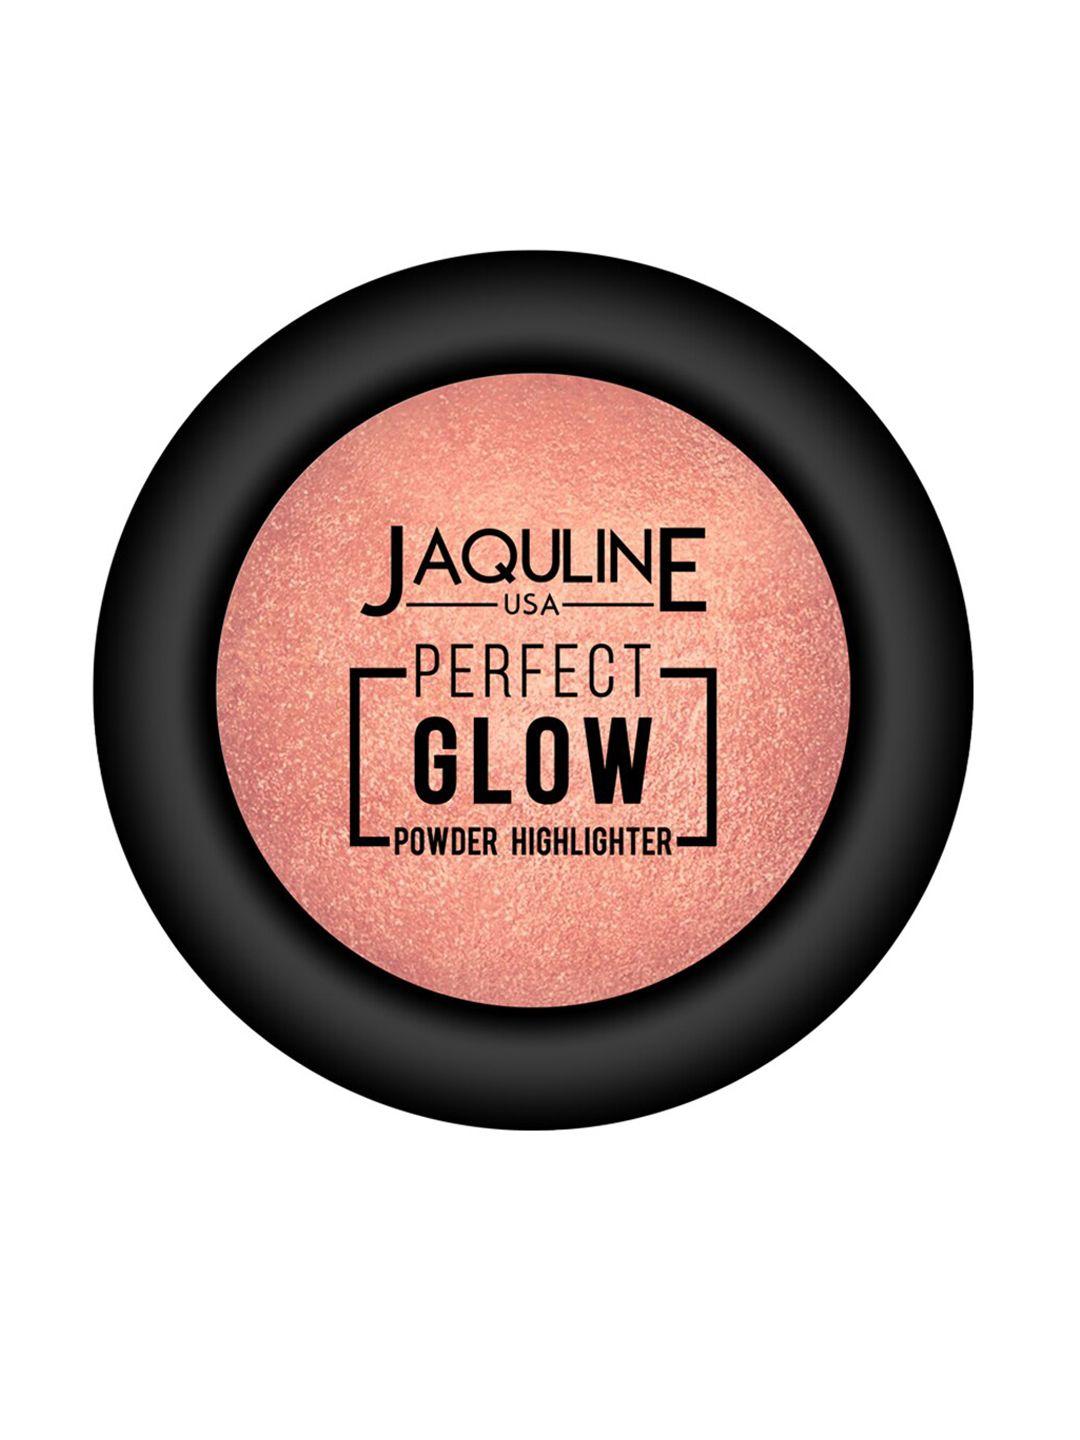 jaquline usa perfect glow powder highlighter - 02 champagne pink